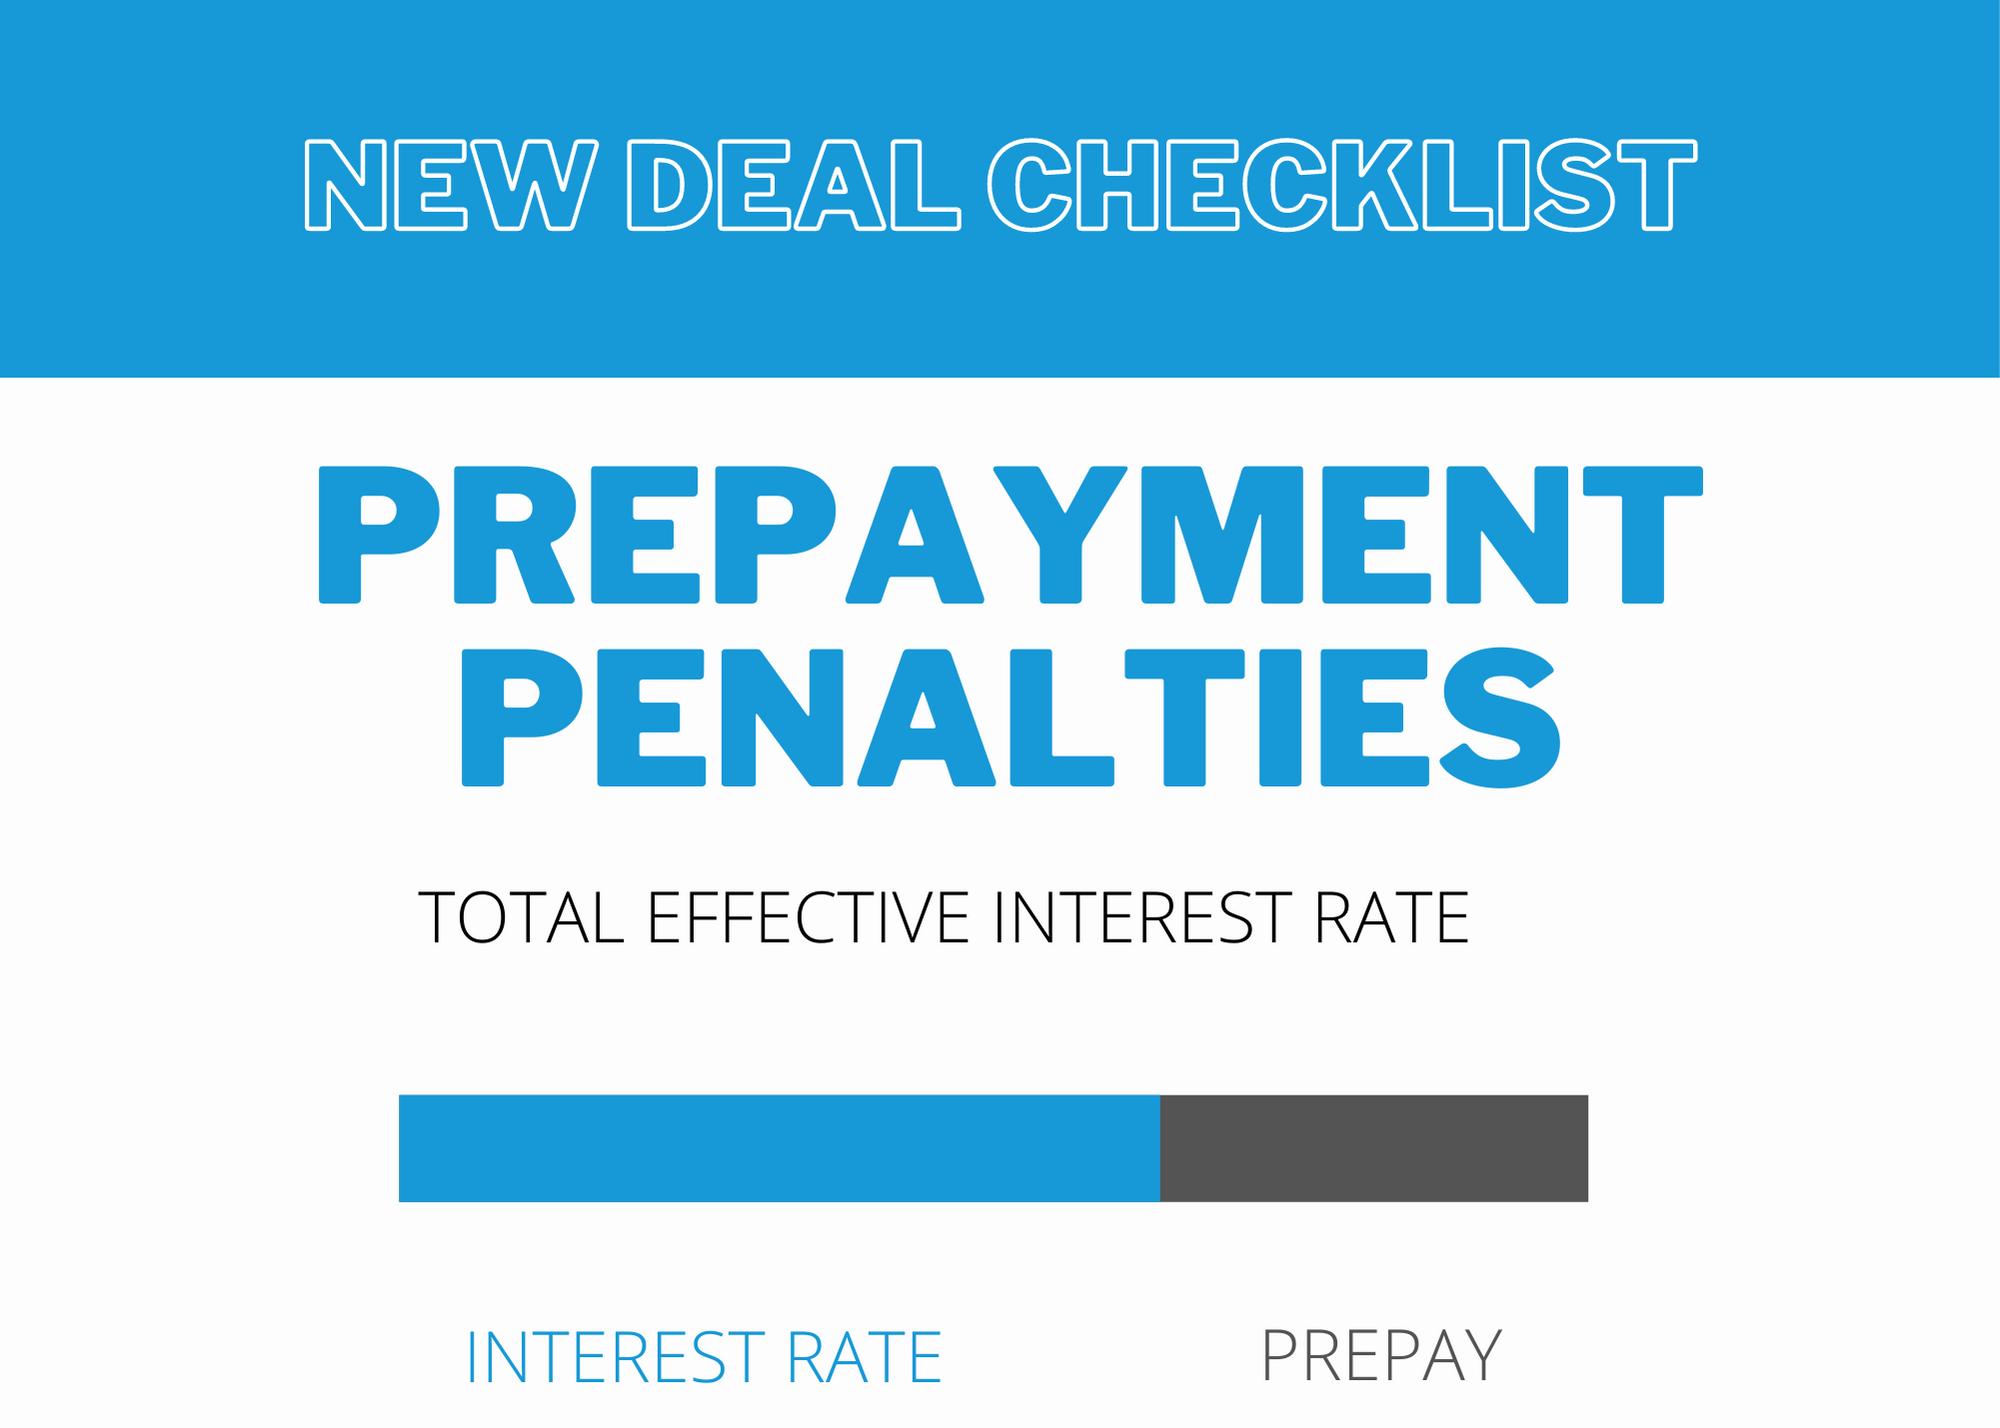 new deal checklist: prepayment penalties as part of your total effective interest rate